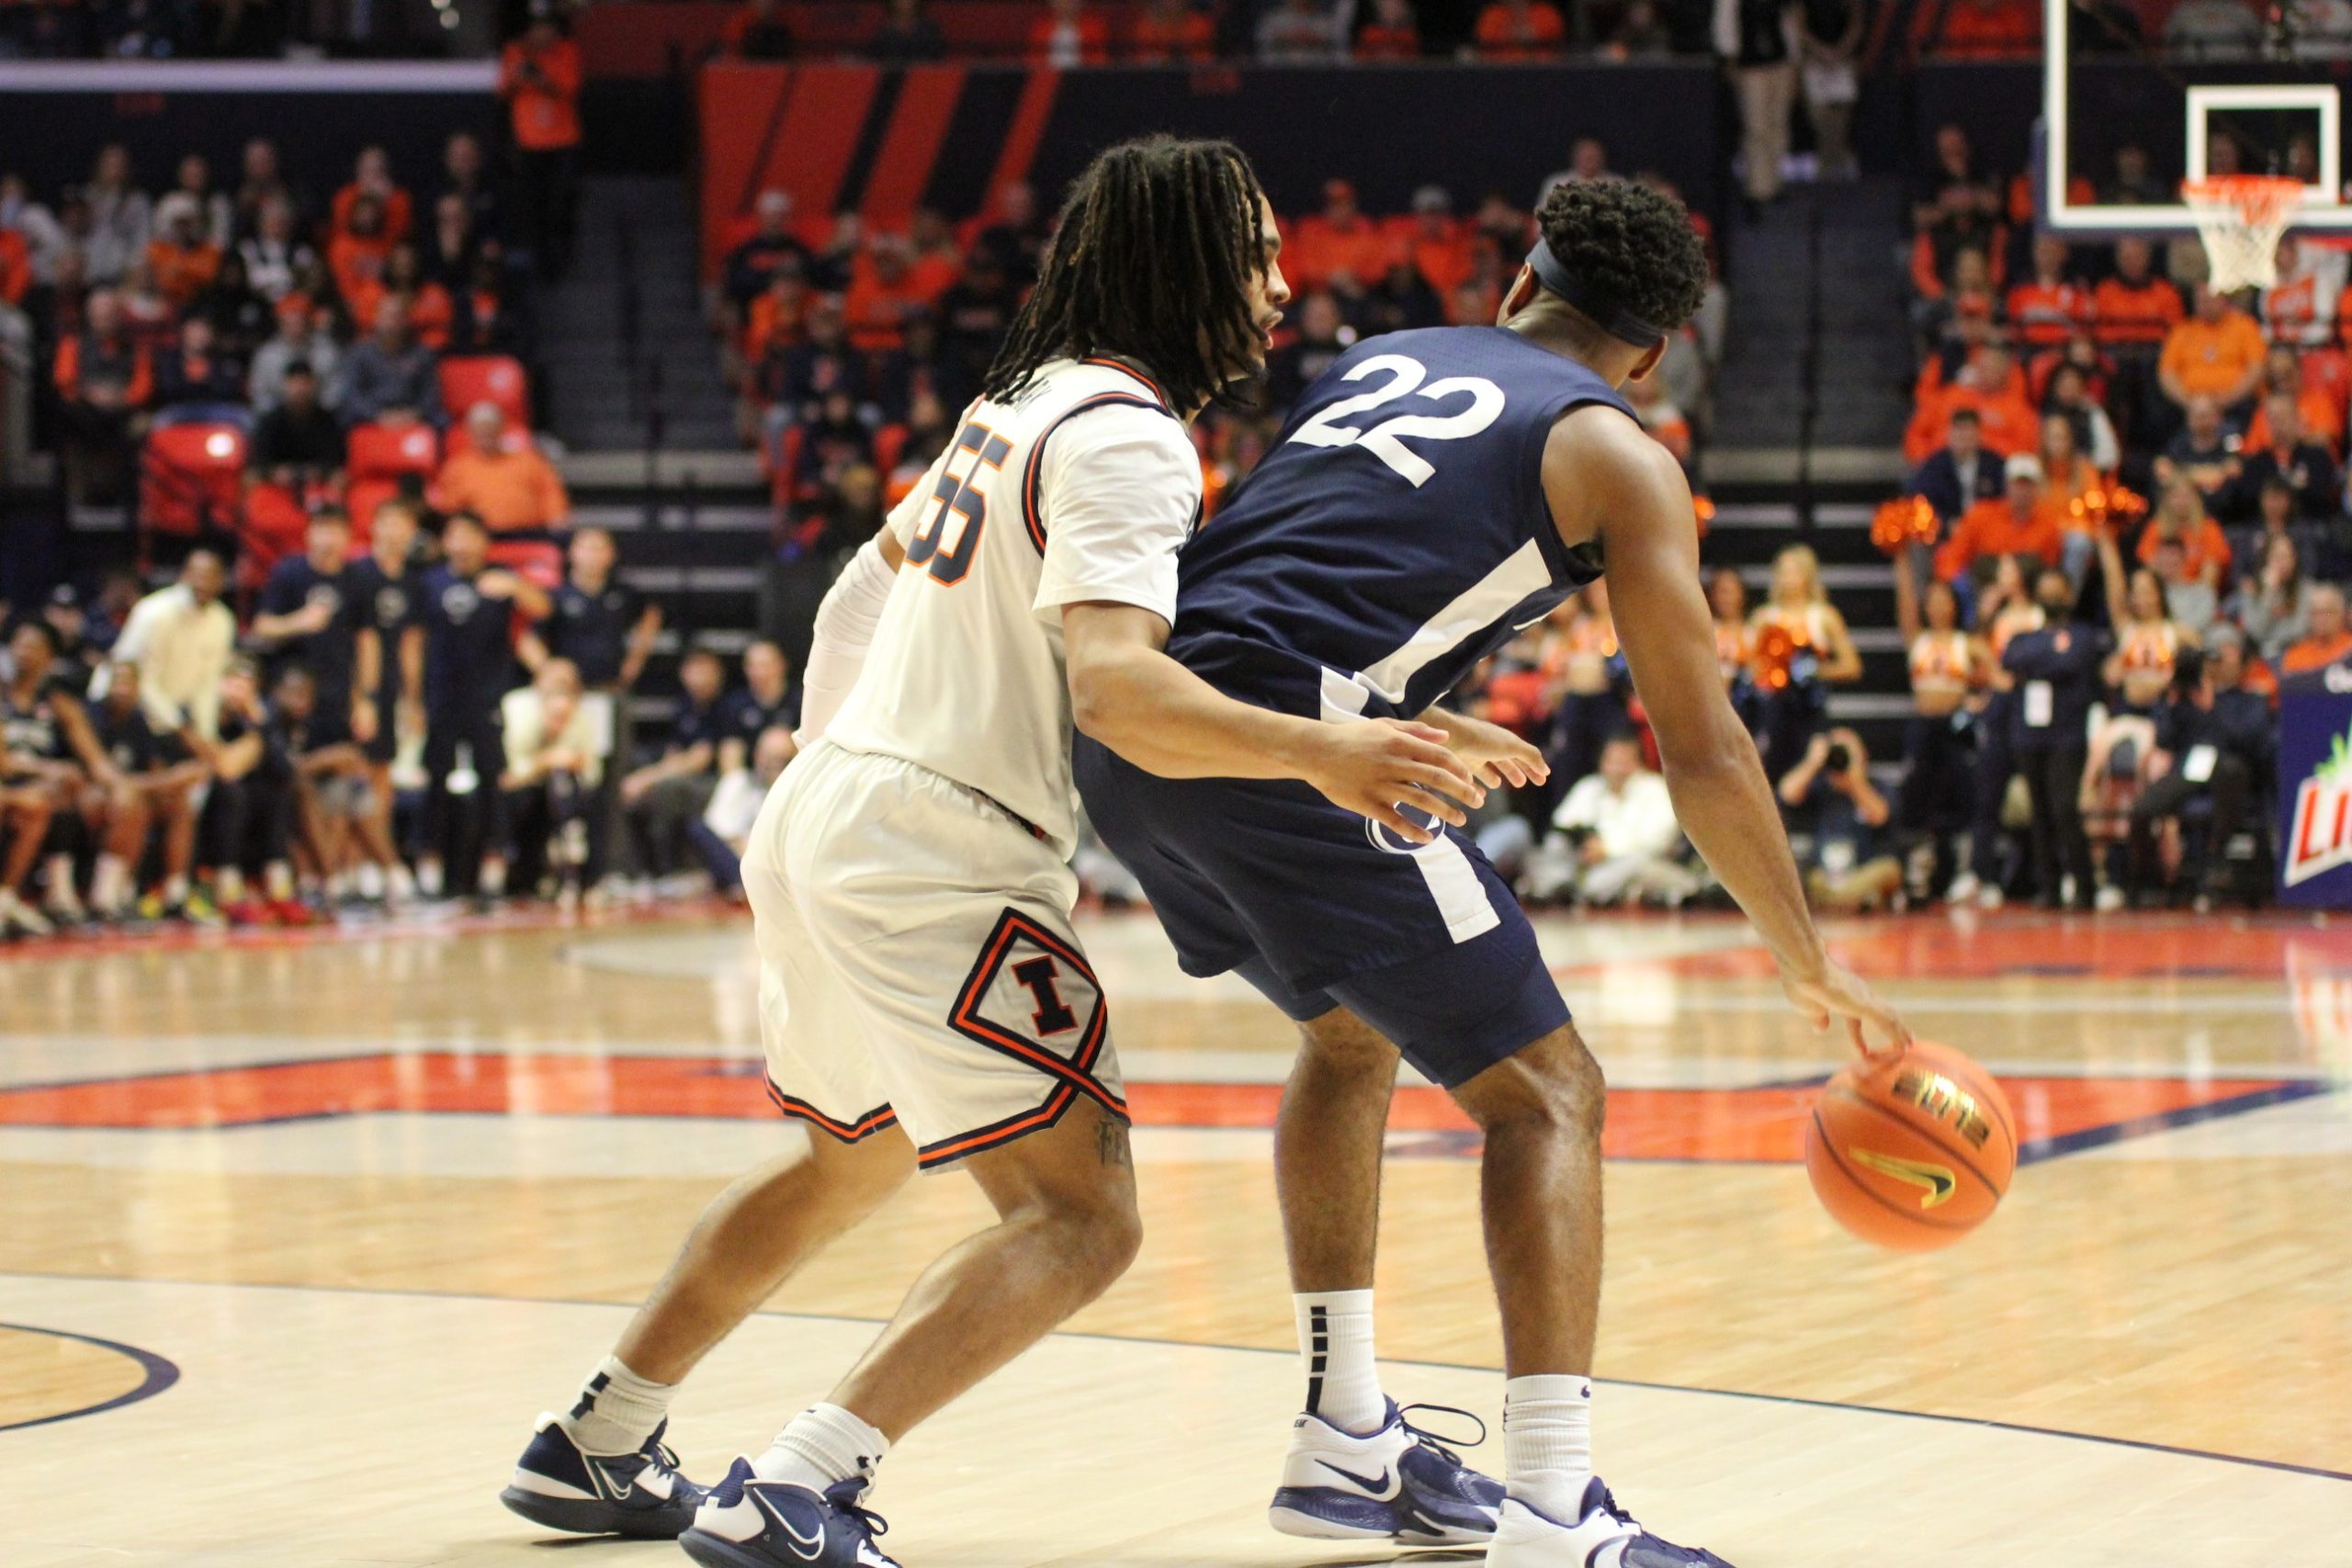 Sturdy's 4 Takeaways - The Illini's Very Bad Day versus Penn State